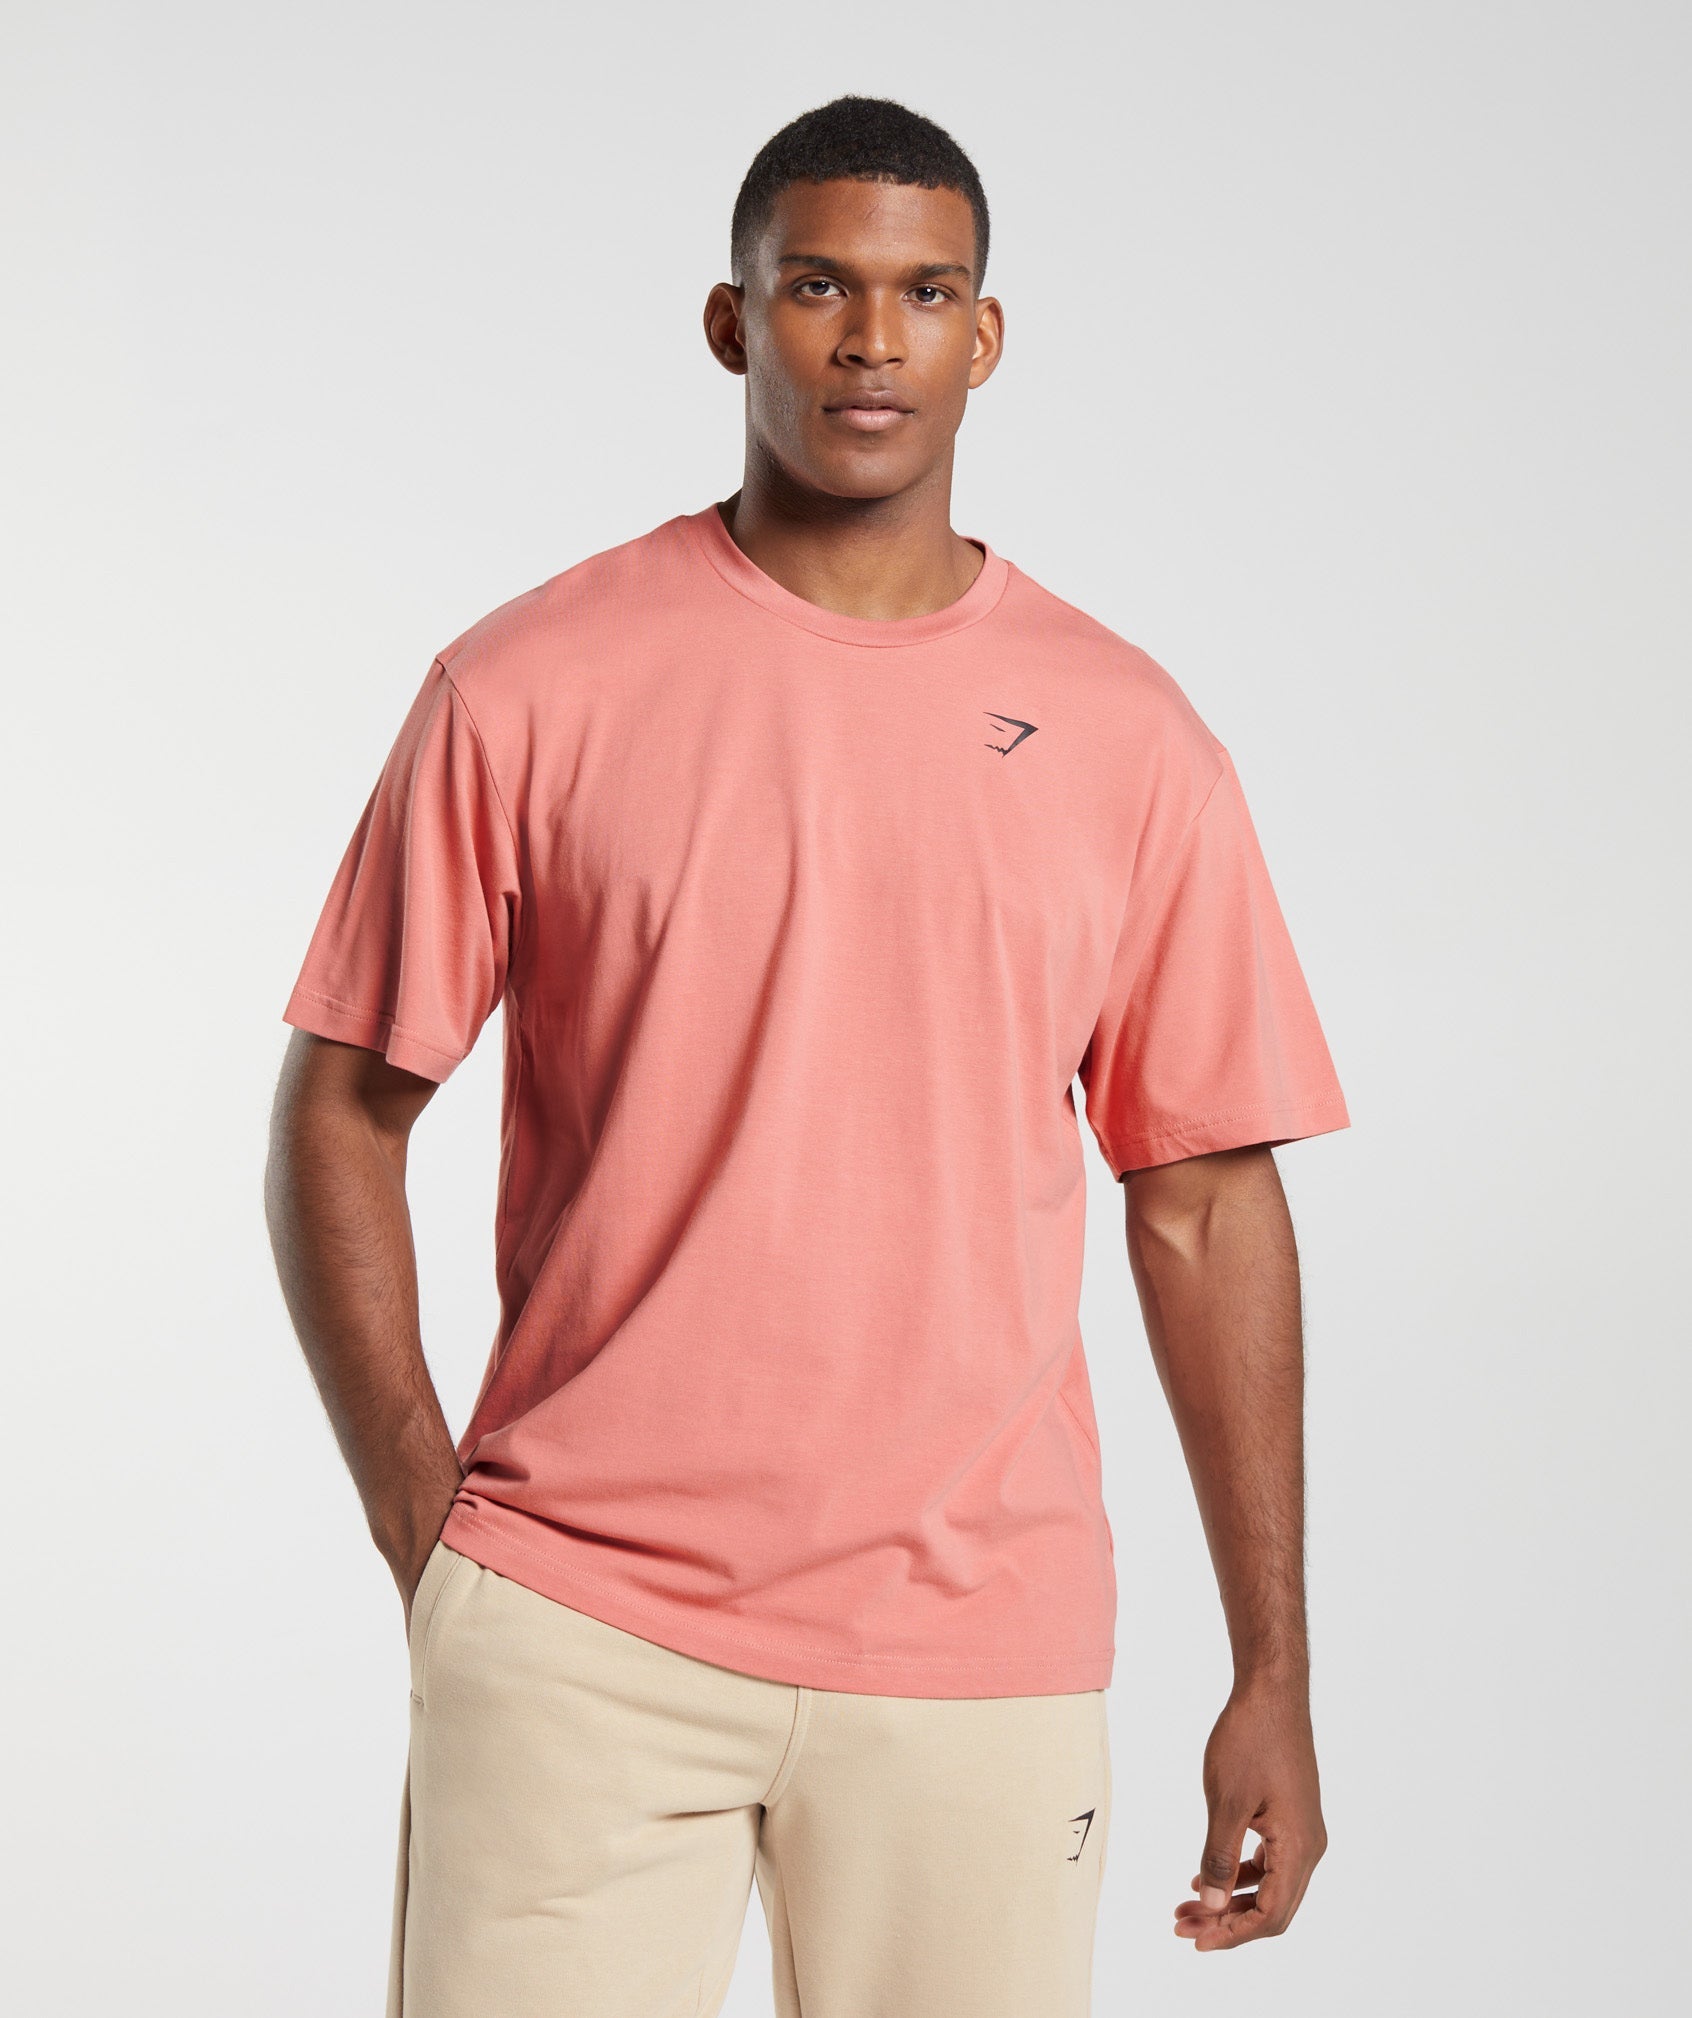 Essential Oversized T-Shirt in Terracotta Pink - view 1